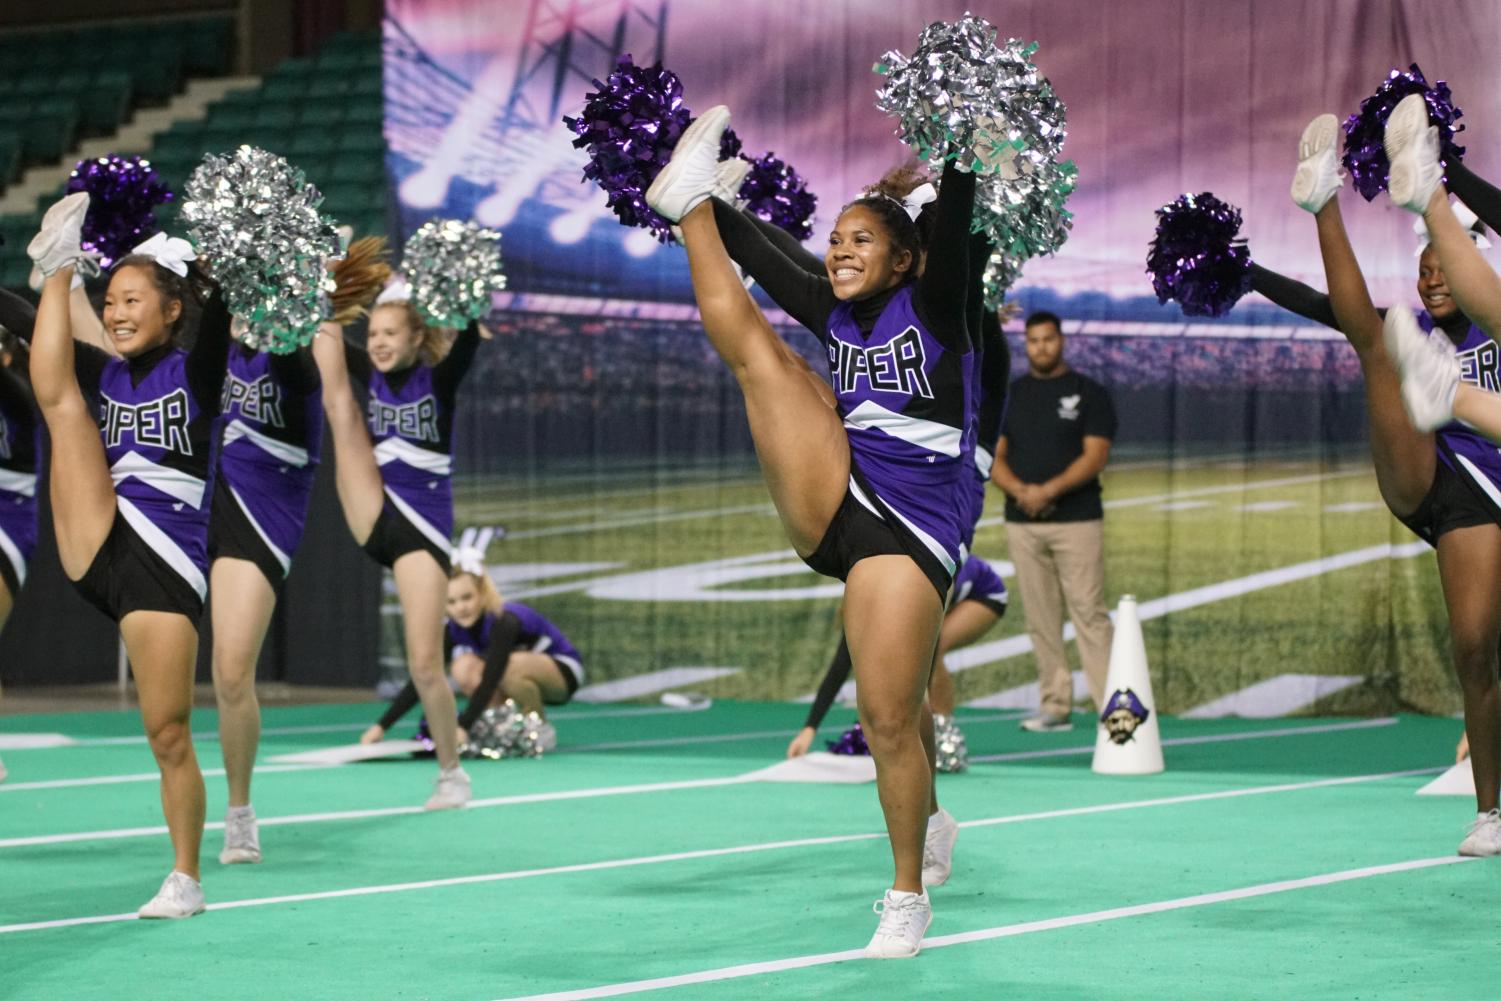 Cheer snags first at State Competition